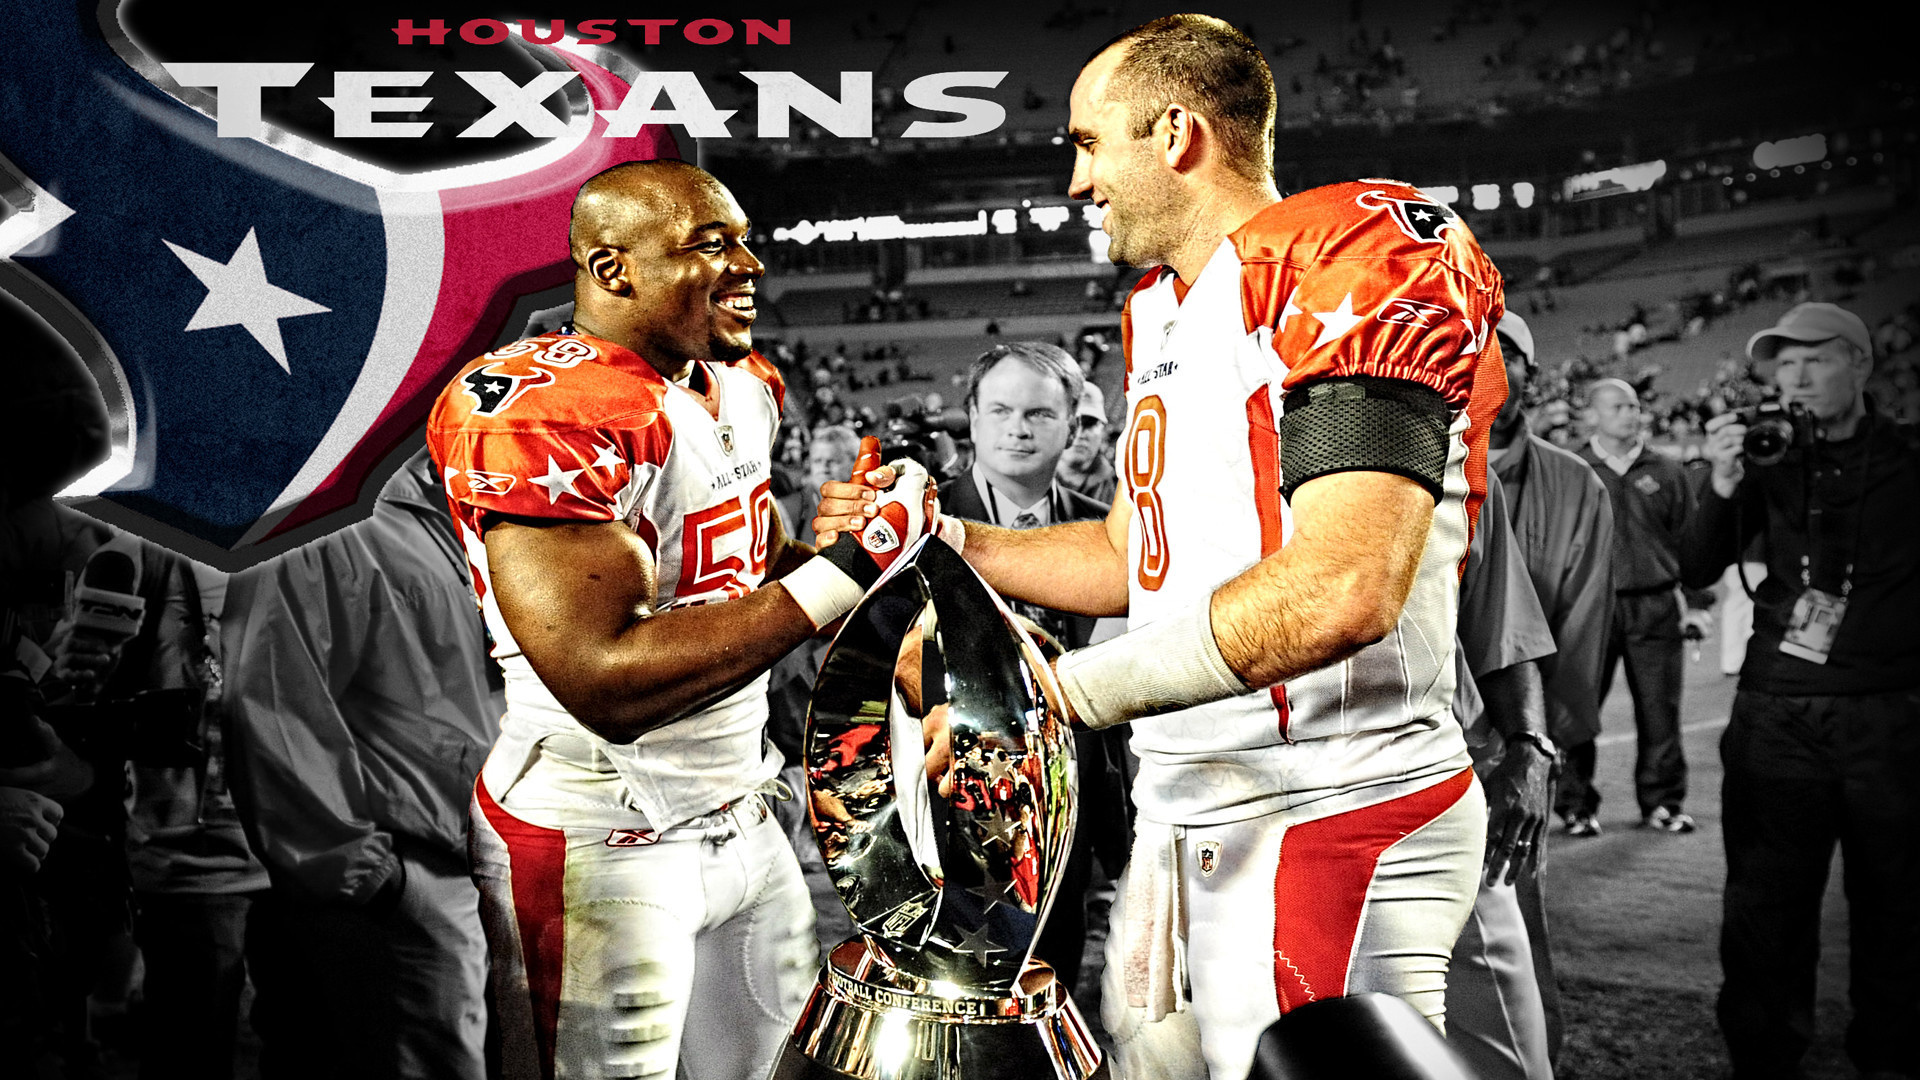 Houston Texans, Wallpapers, Background pictures, Team support, 1920x1080 Full HD Desktop